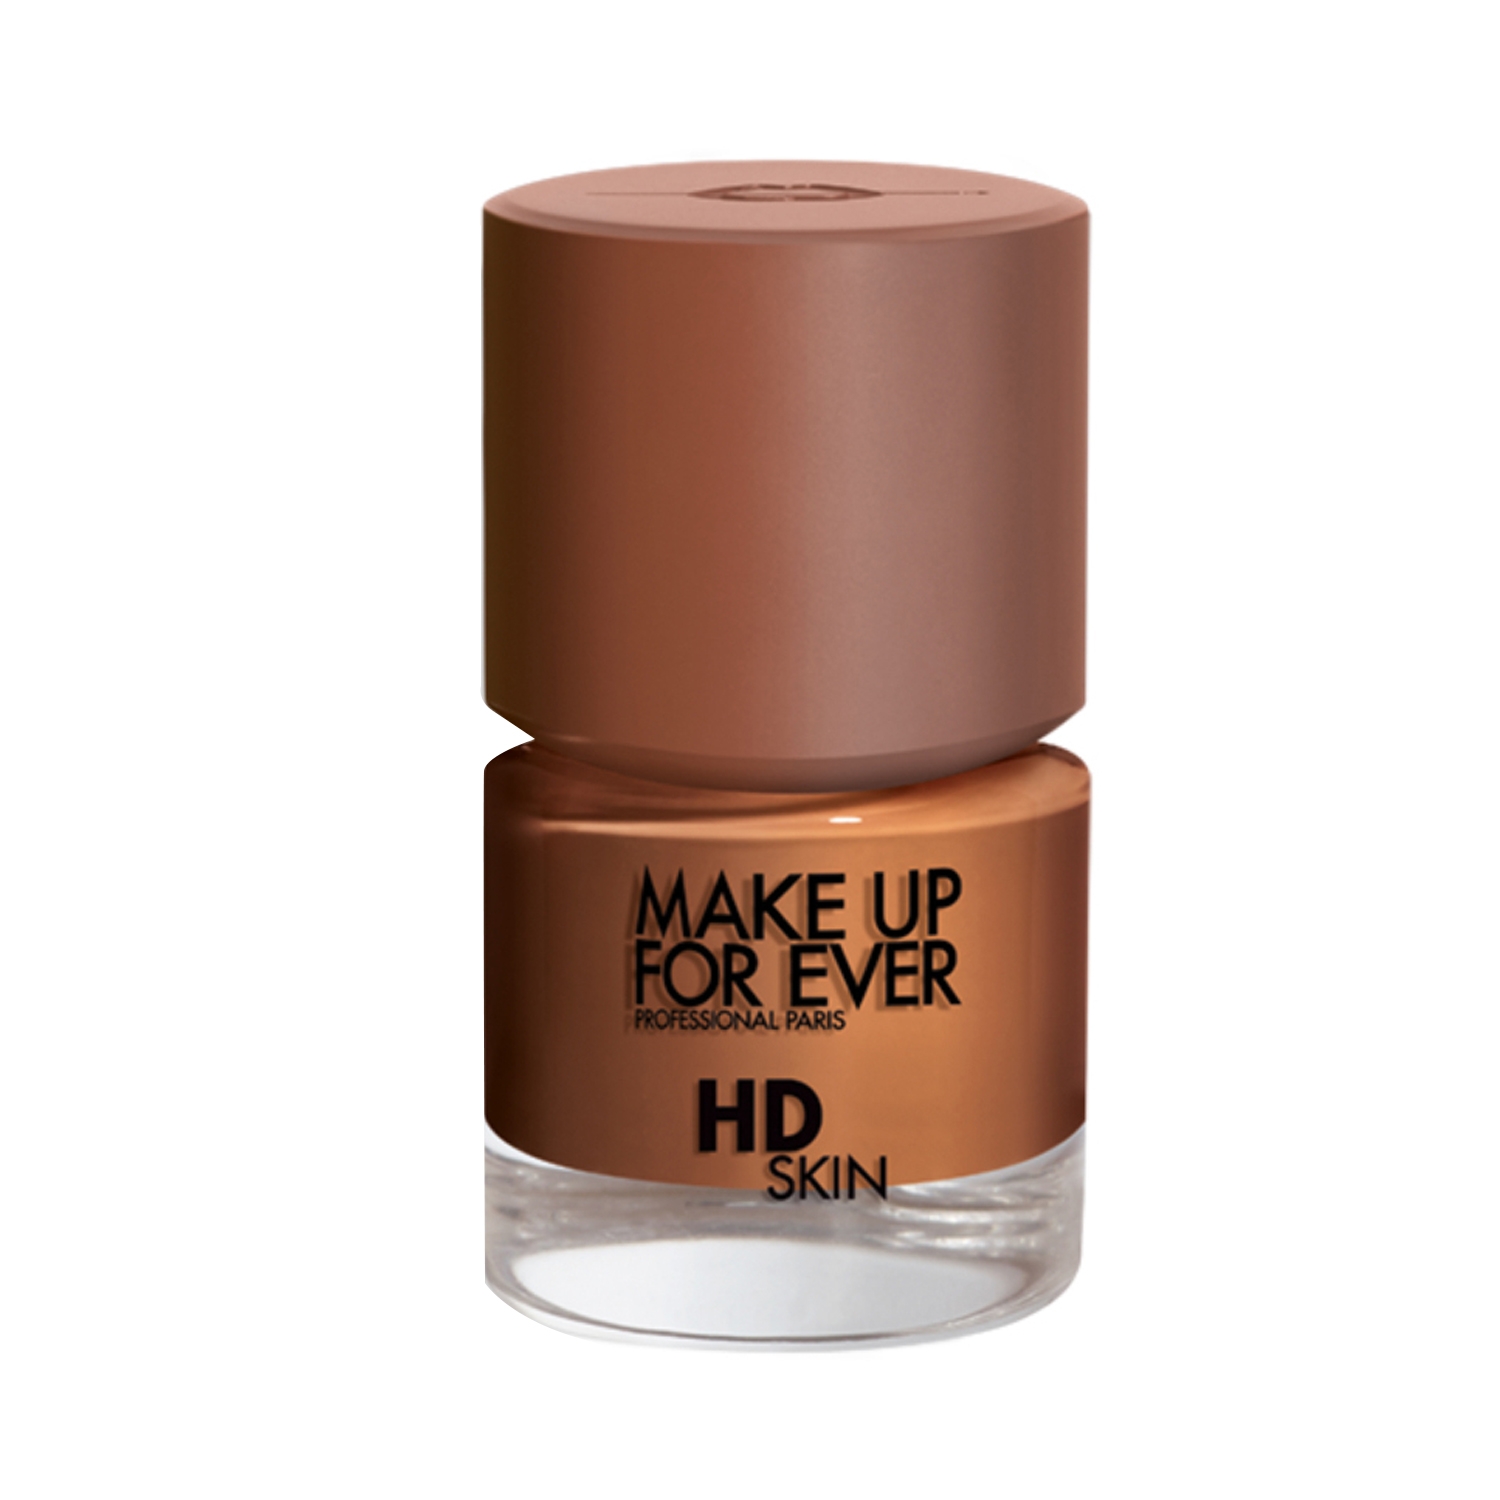 Make Up For Ever | Make Up For Ever HD Skin Undetectable Liquid Foundation - 4N62 Almond (12ml)